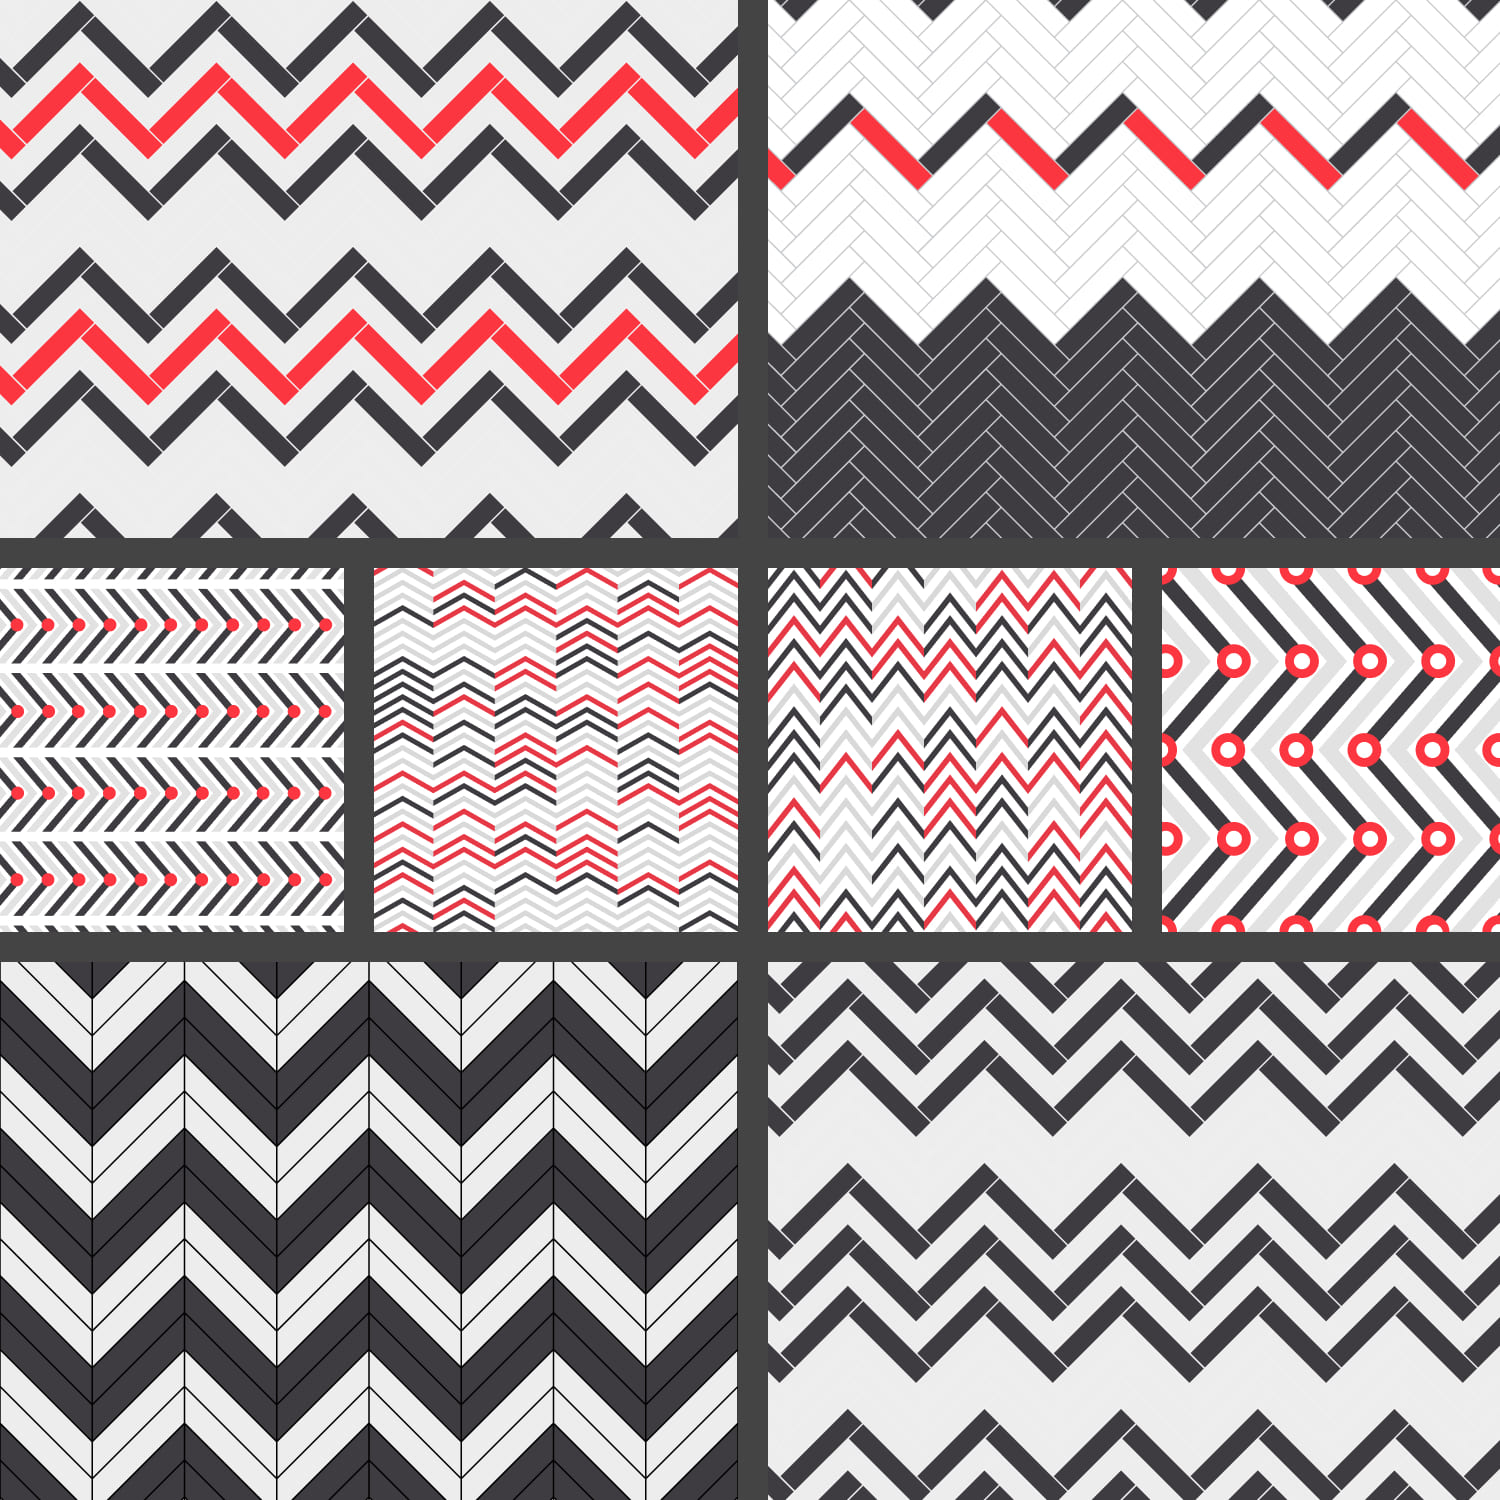 8 Black & Red Chevron Patterns cover.